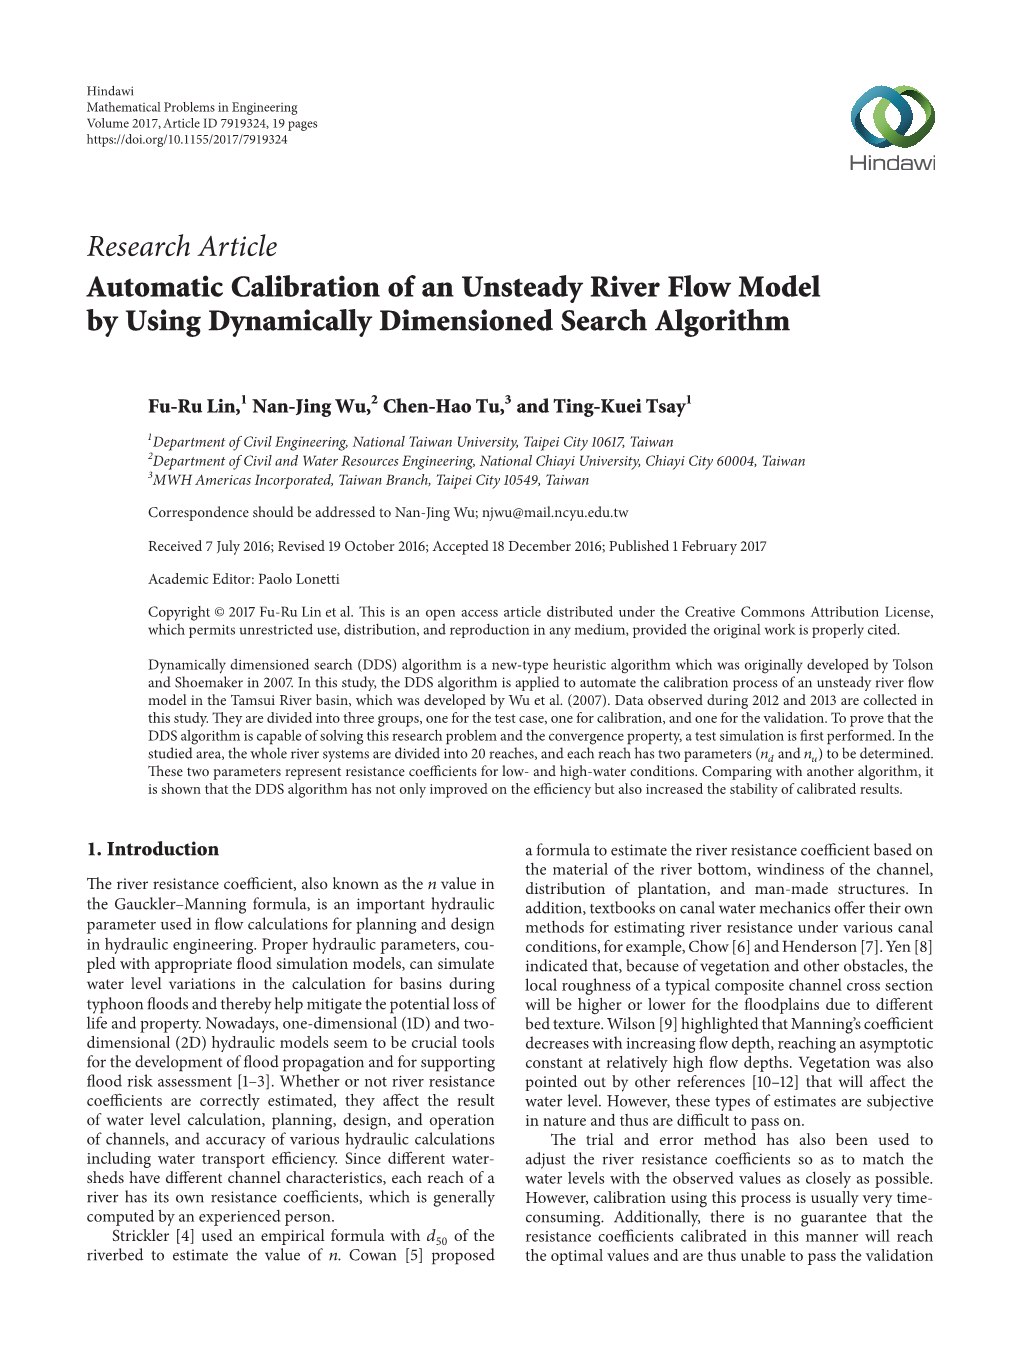 Research Article Automatic Calibration of an Unsteady River Flow Model by Using Dynamically Dimensioned Search Algorithm